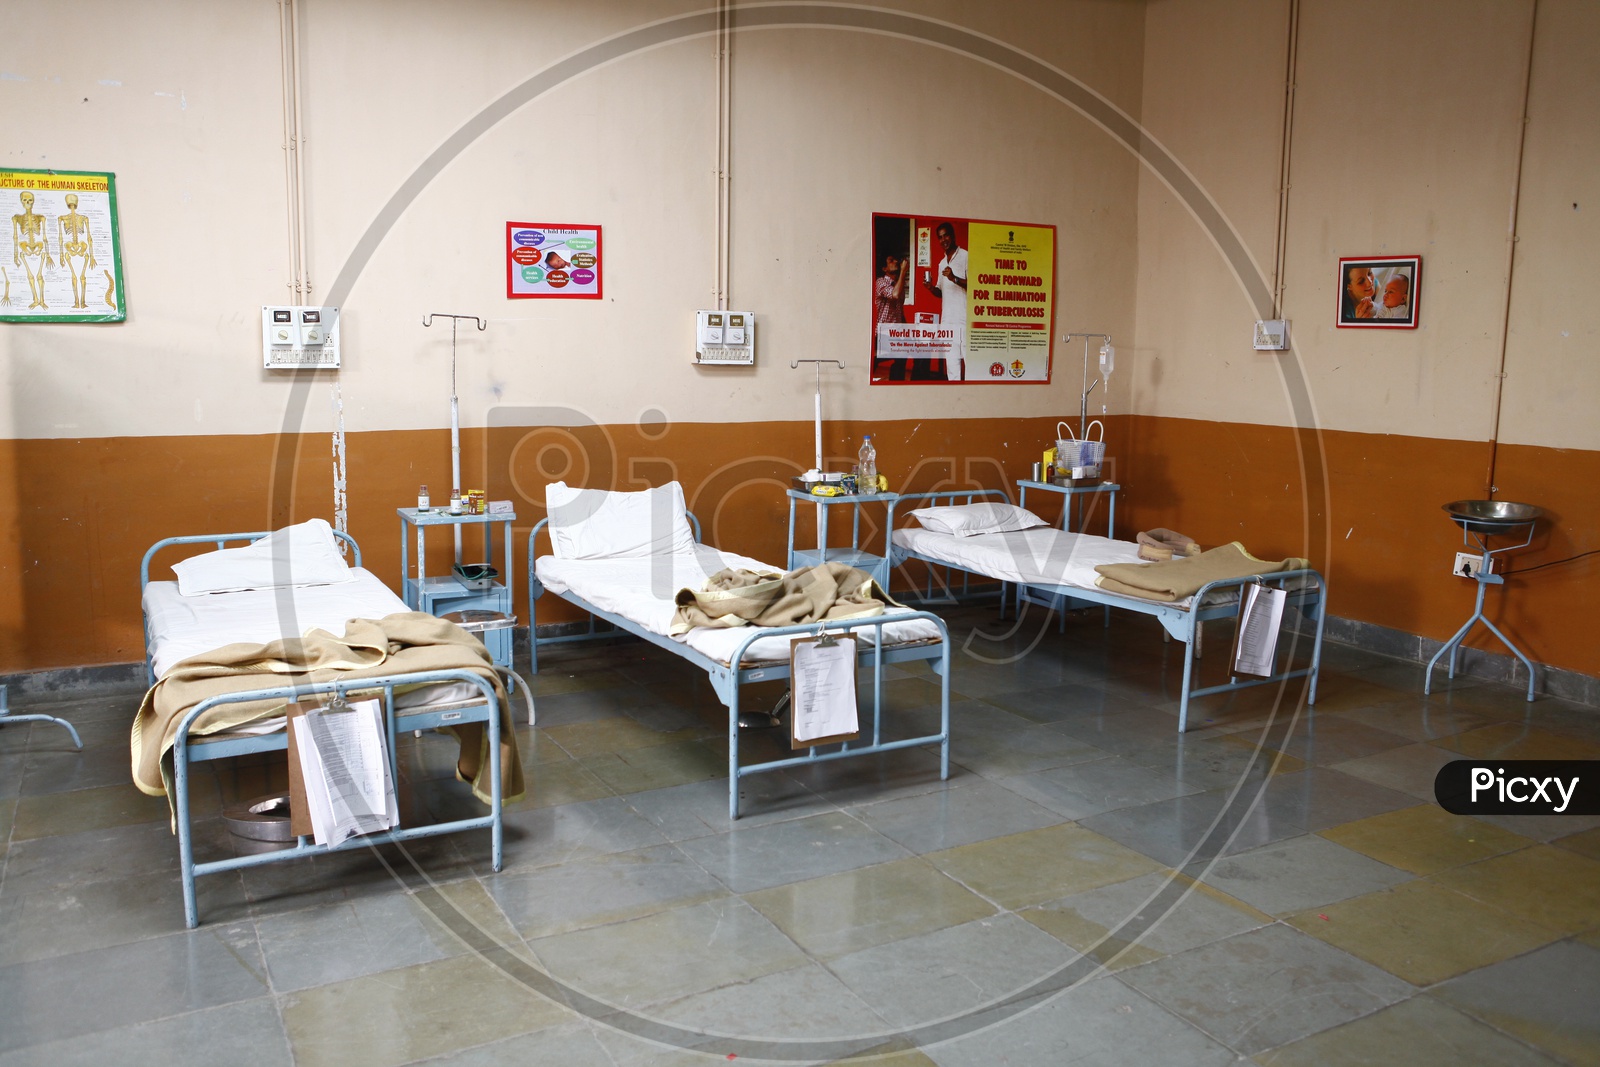 Patients recovery beds in a Hospital